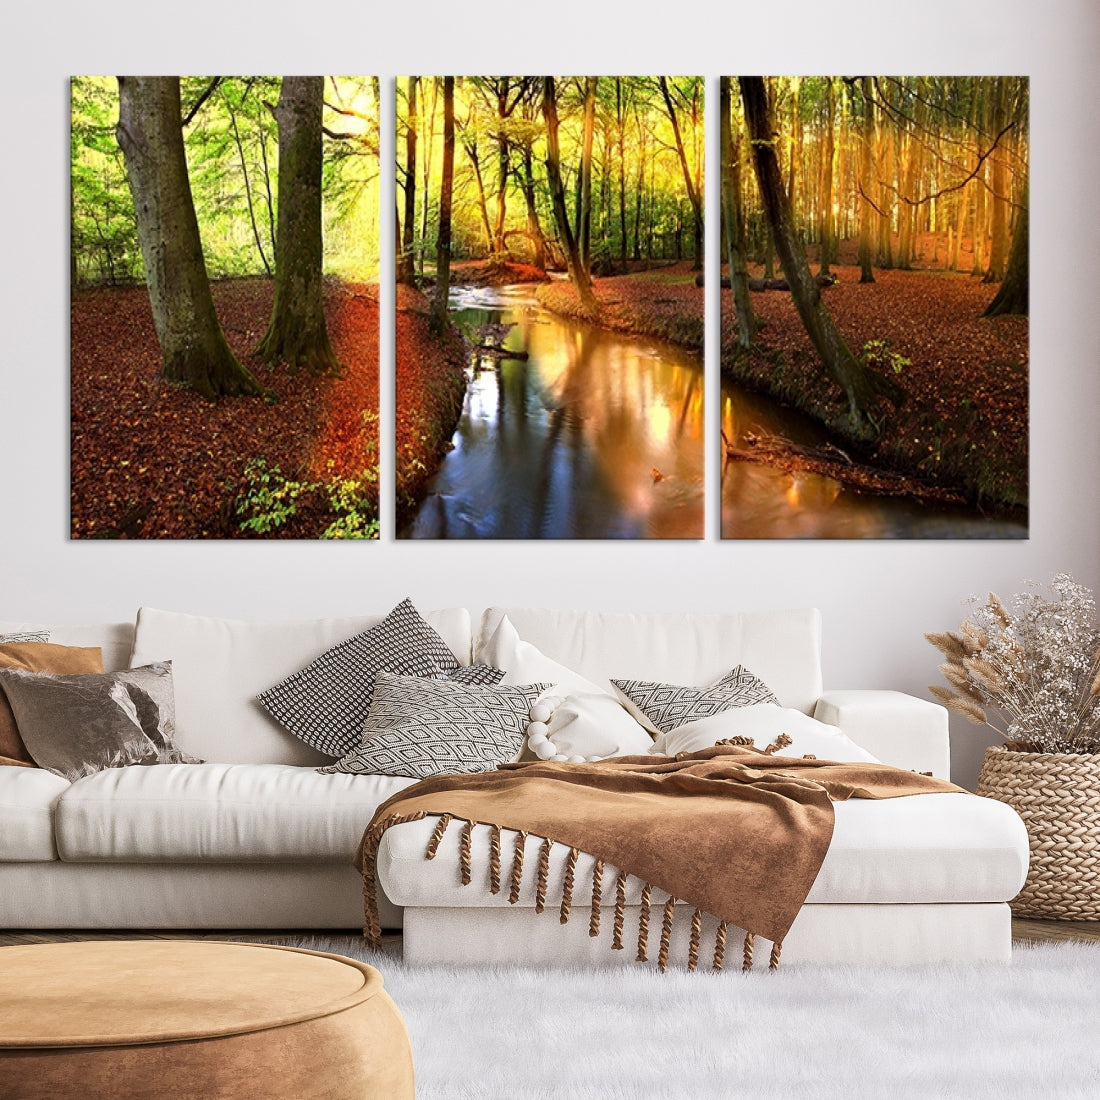 Large Wall Art Landscape Canvas Print - Small River Inside Colorful Forest